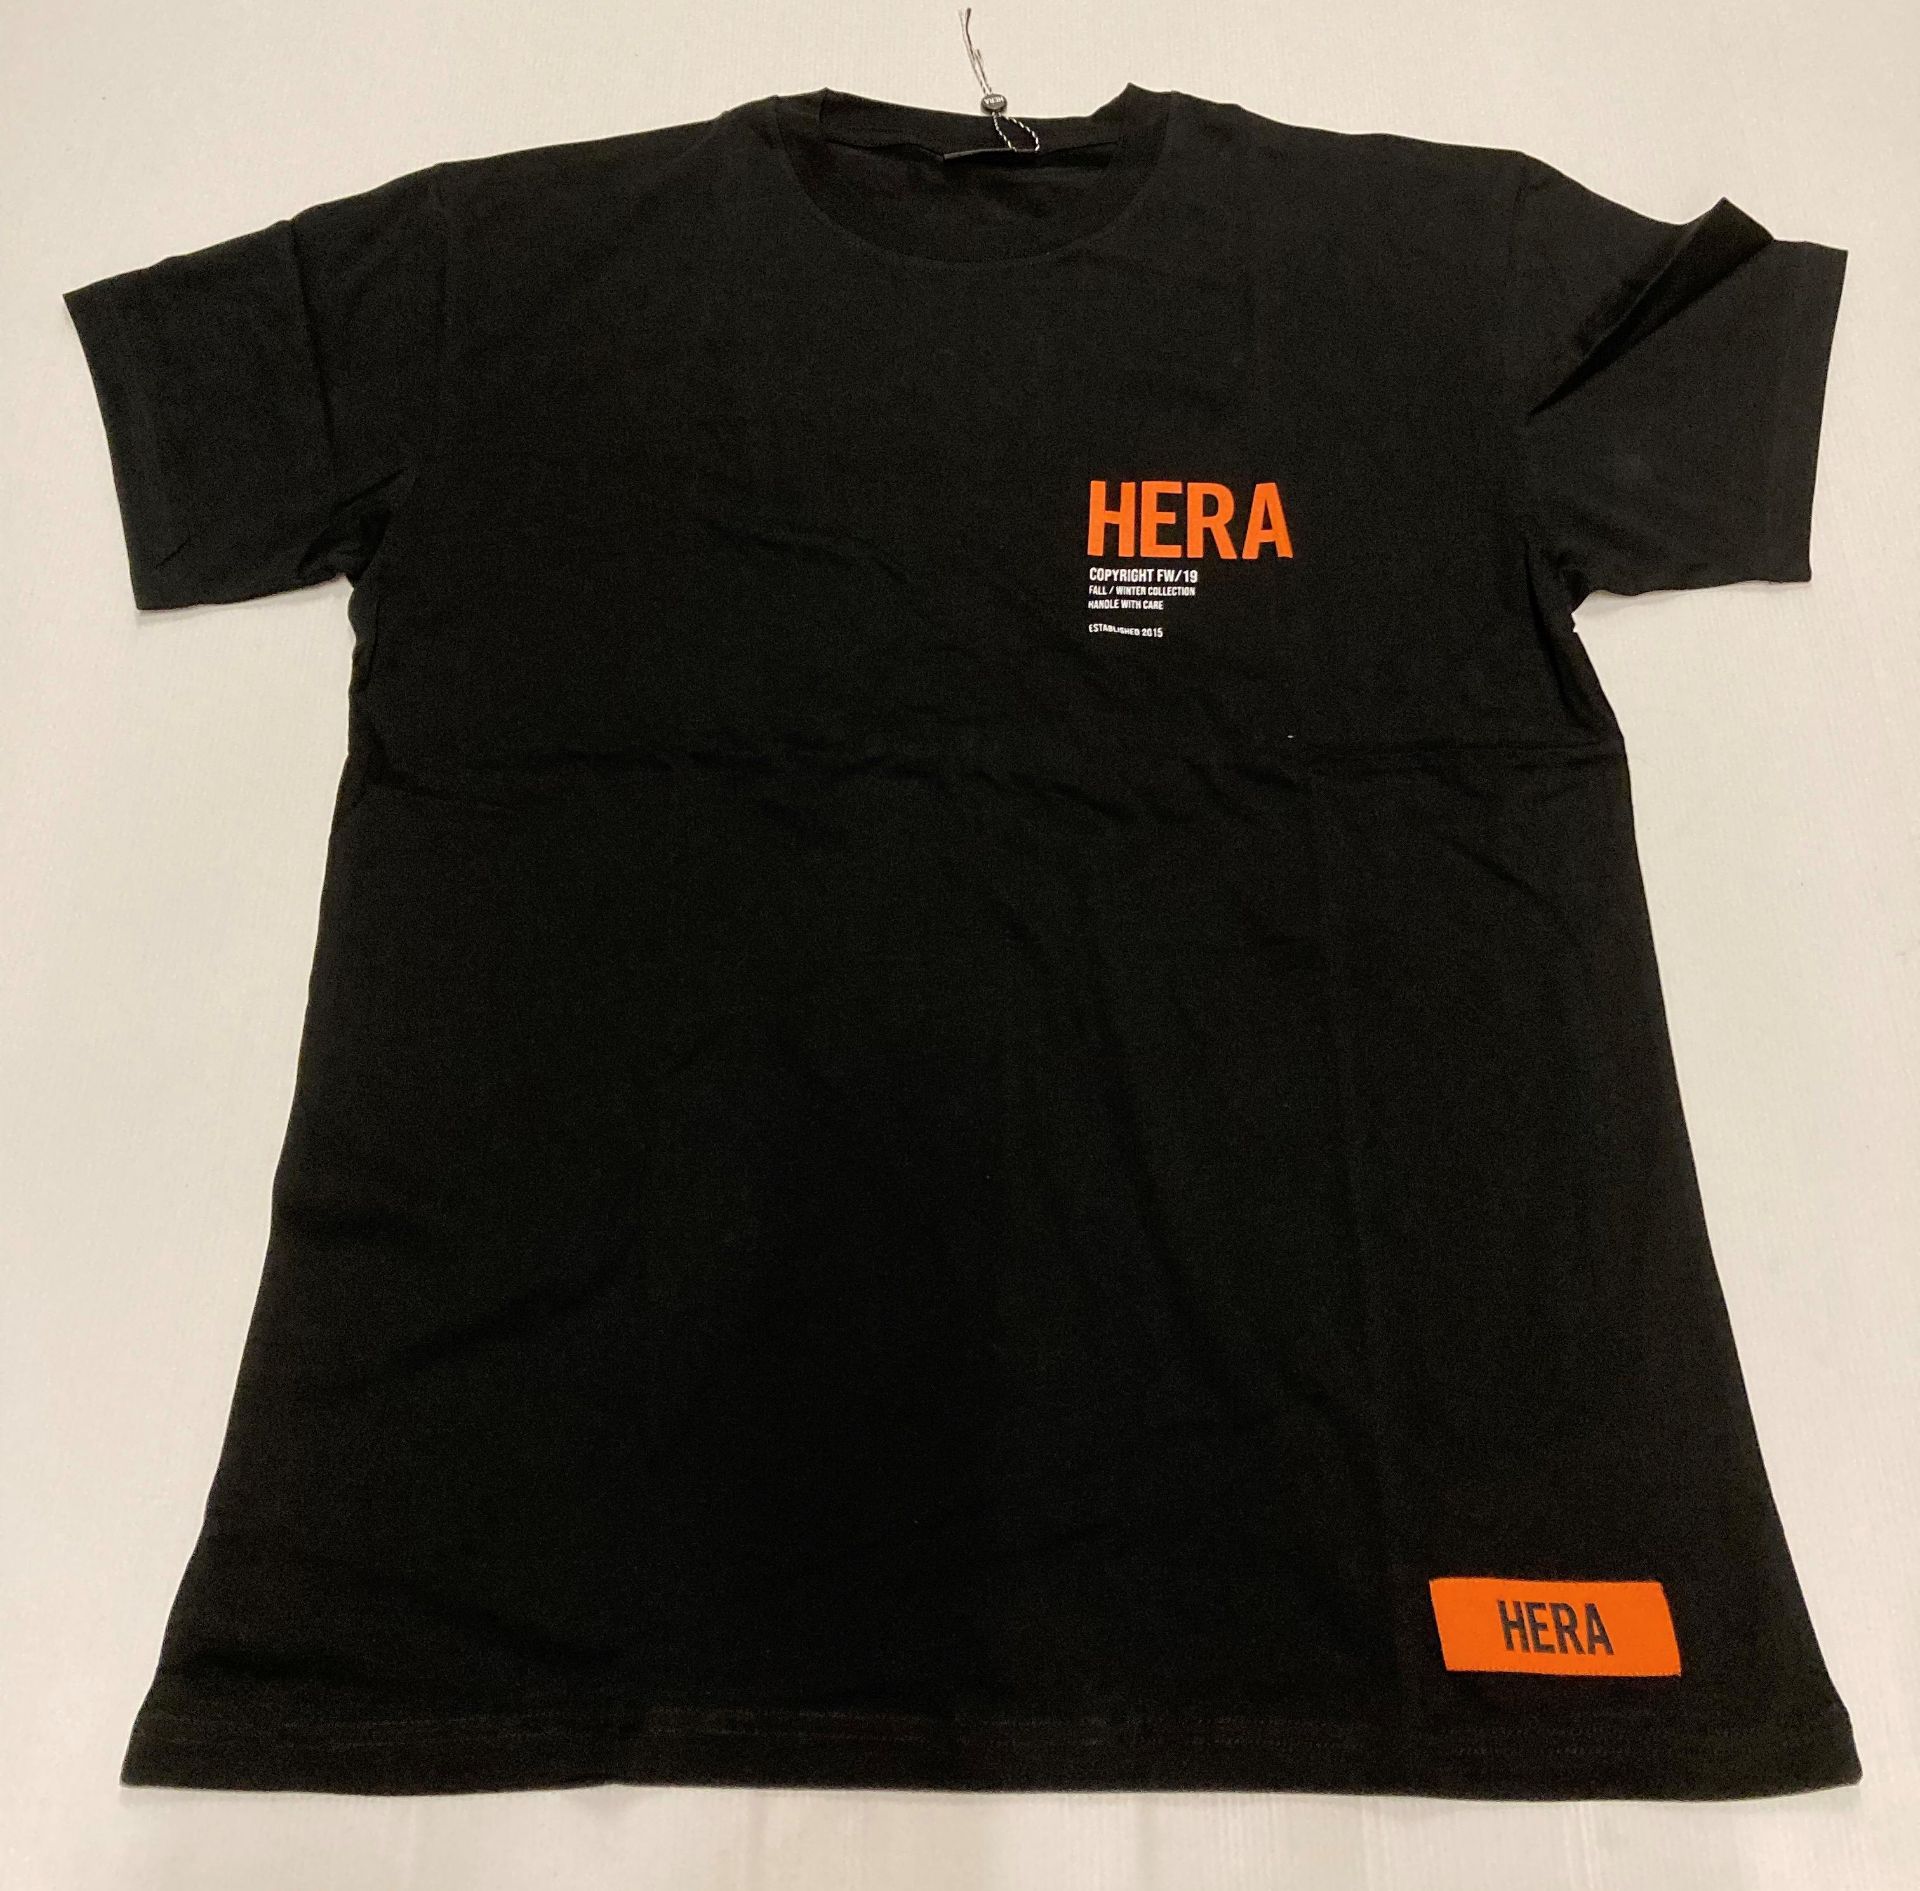 4 x items - 3 x Hera t-shirts, black with blue and pink text (2 x L, 1 x M) and 1 x Hera t-shirt, - Image 3 of 4